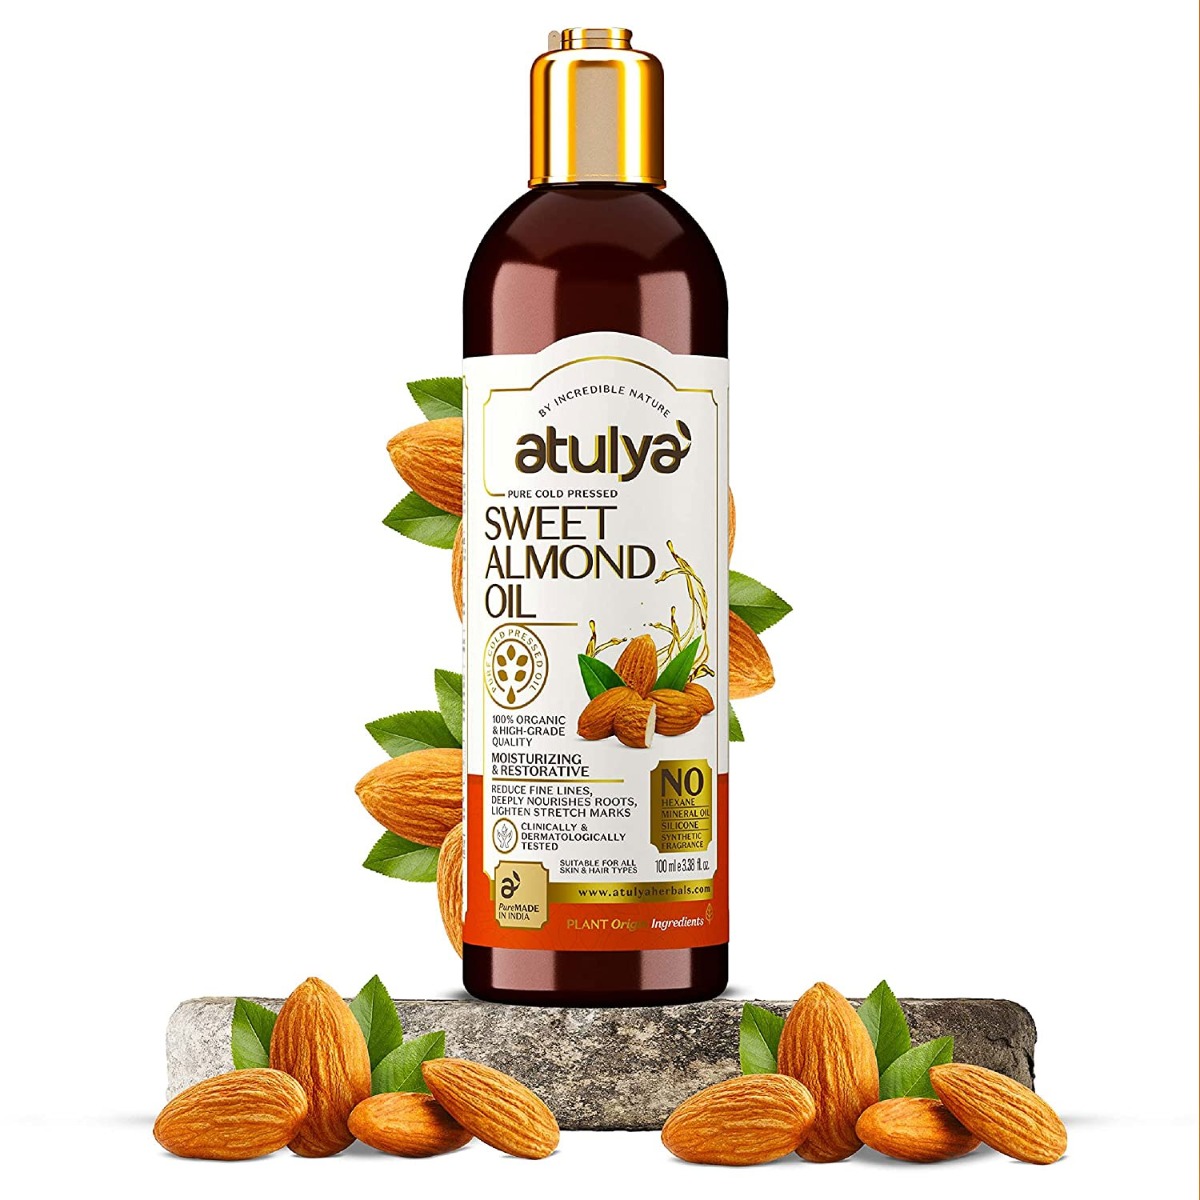 Atulya Pure Cold Pressed Sweet Almond Oil, 100ml